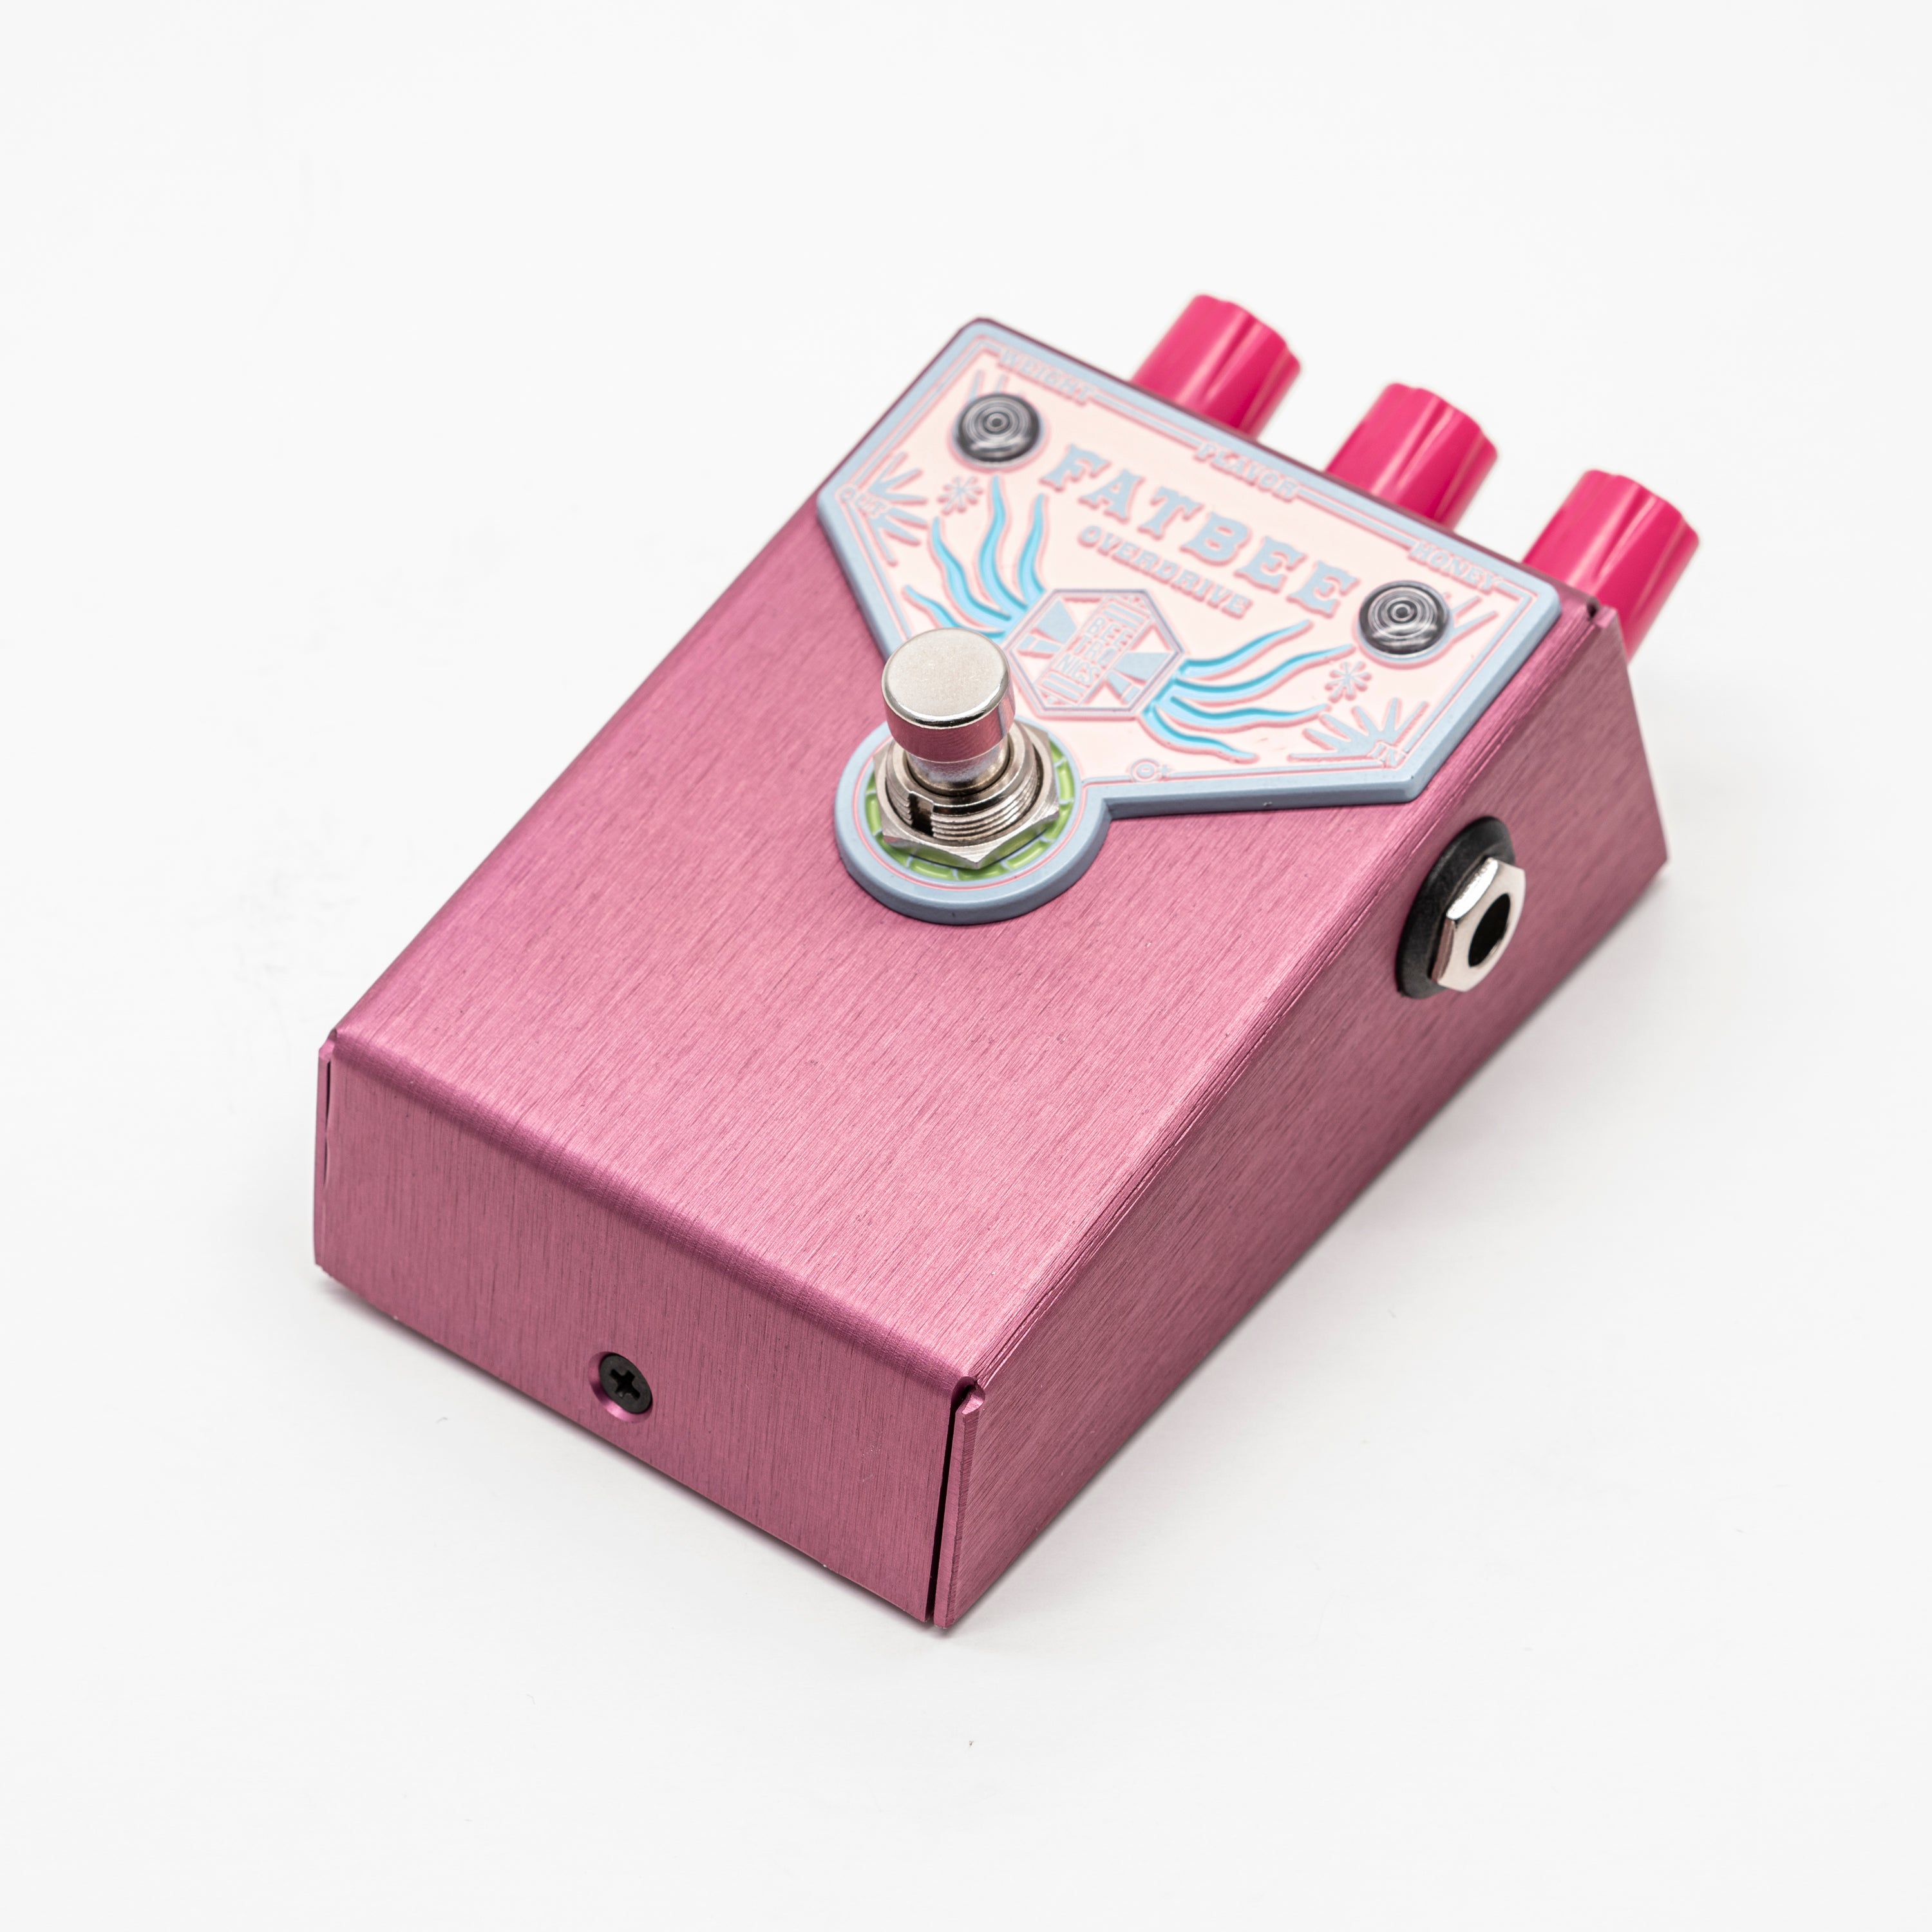 Fatbee Overdrive &lt;p&gt; Limited Edition &lt;p&gt; Majin Bee